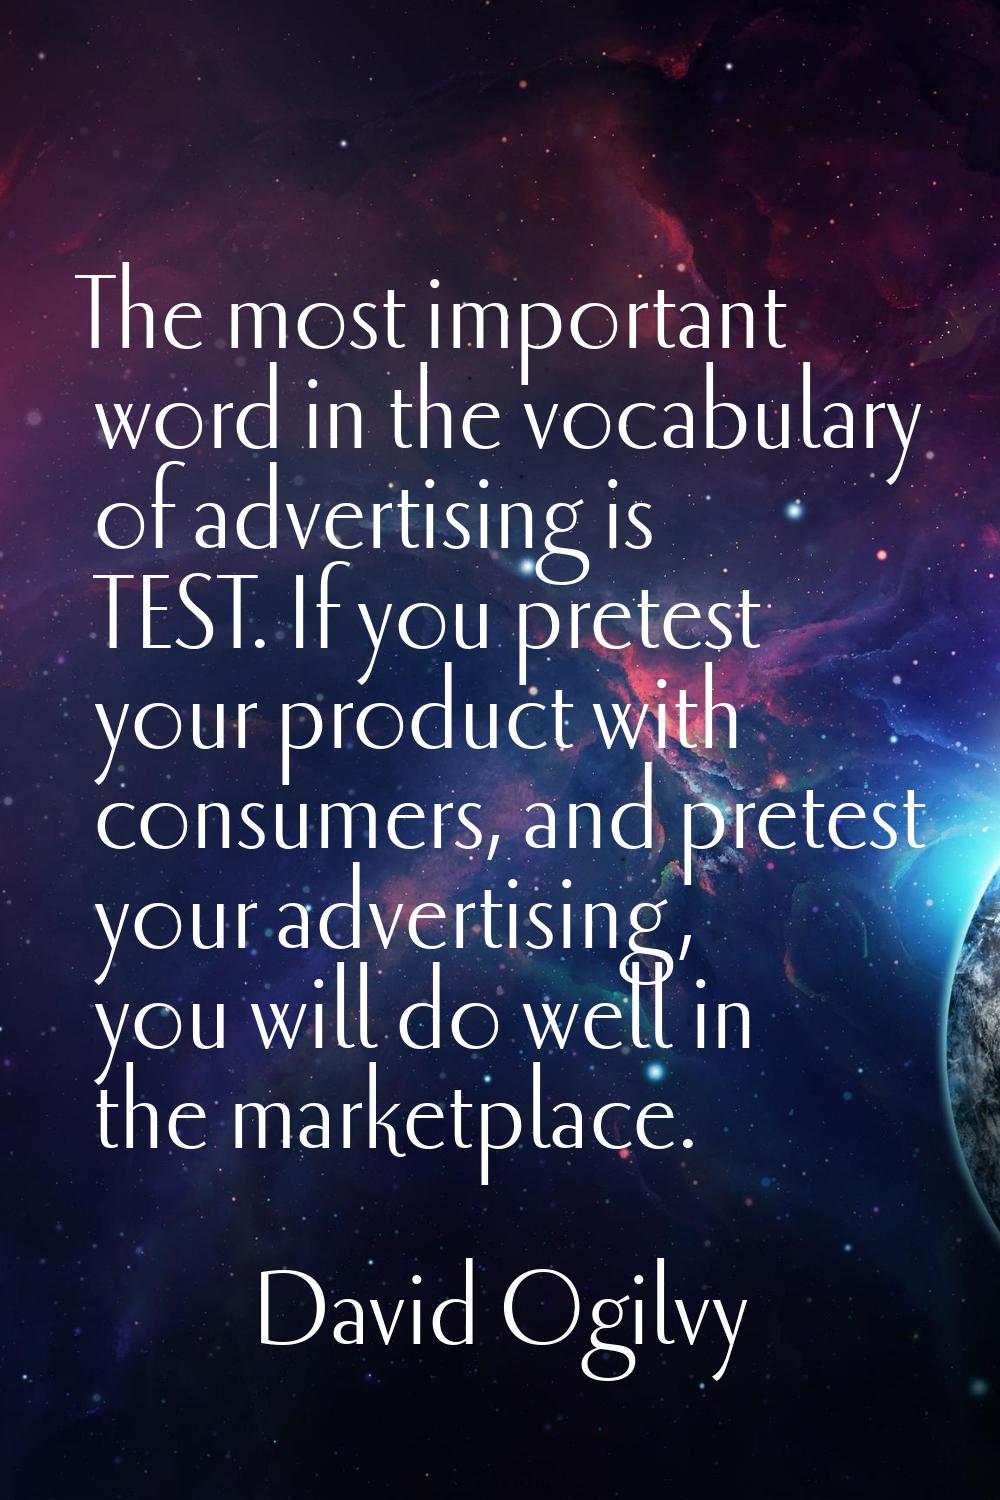 The most important word in the vocabulary of advertising is TEST. If you pretest your product with 